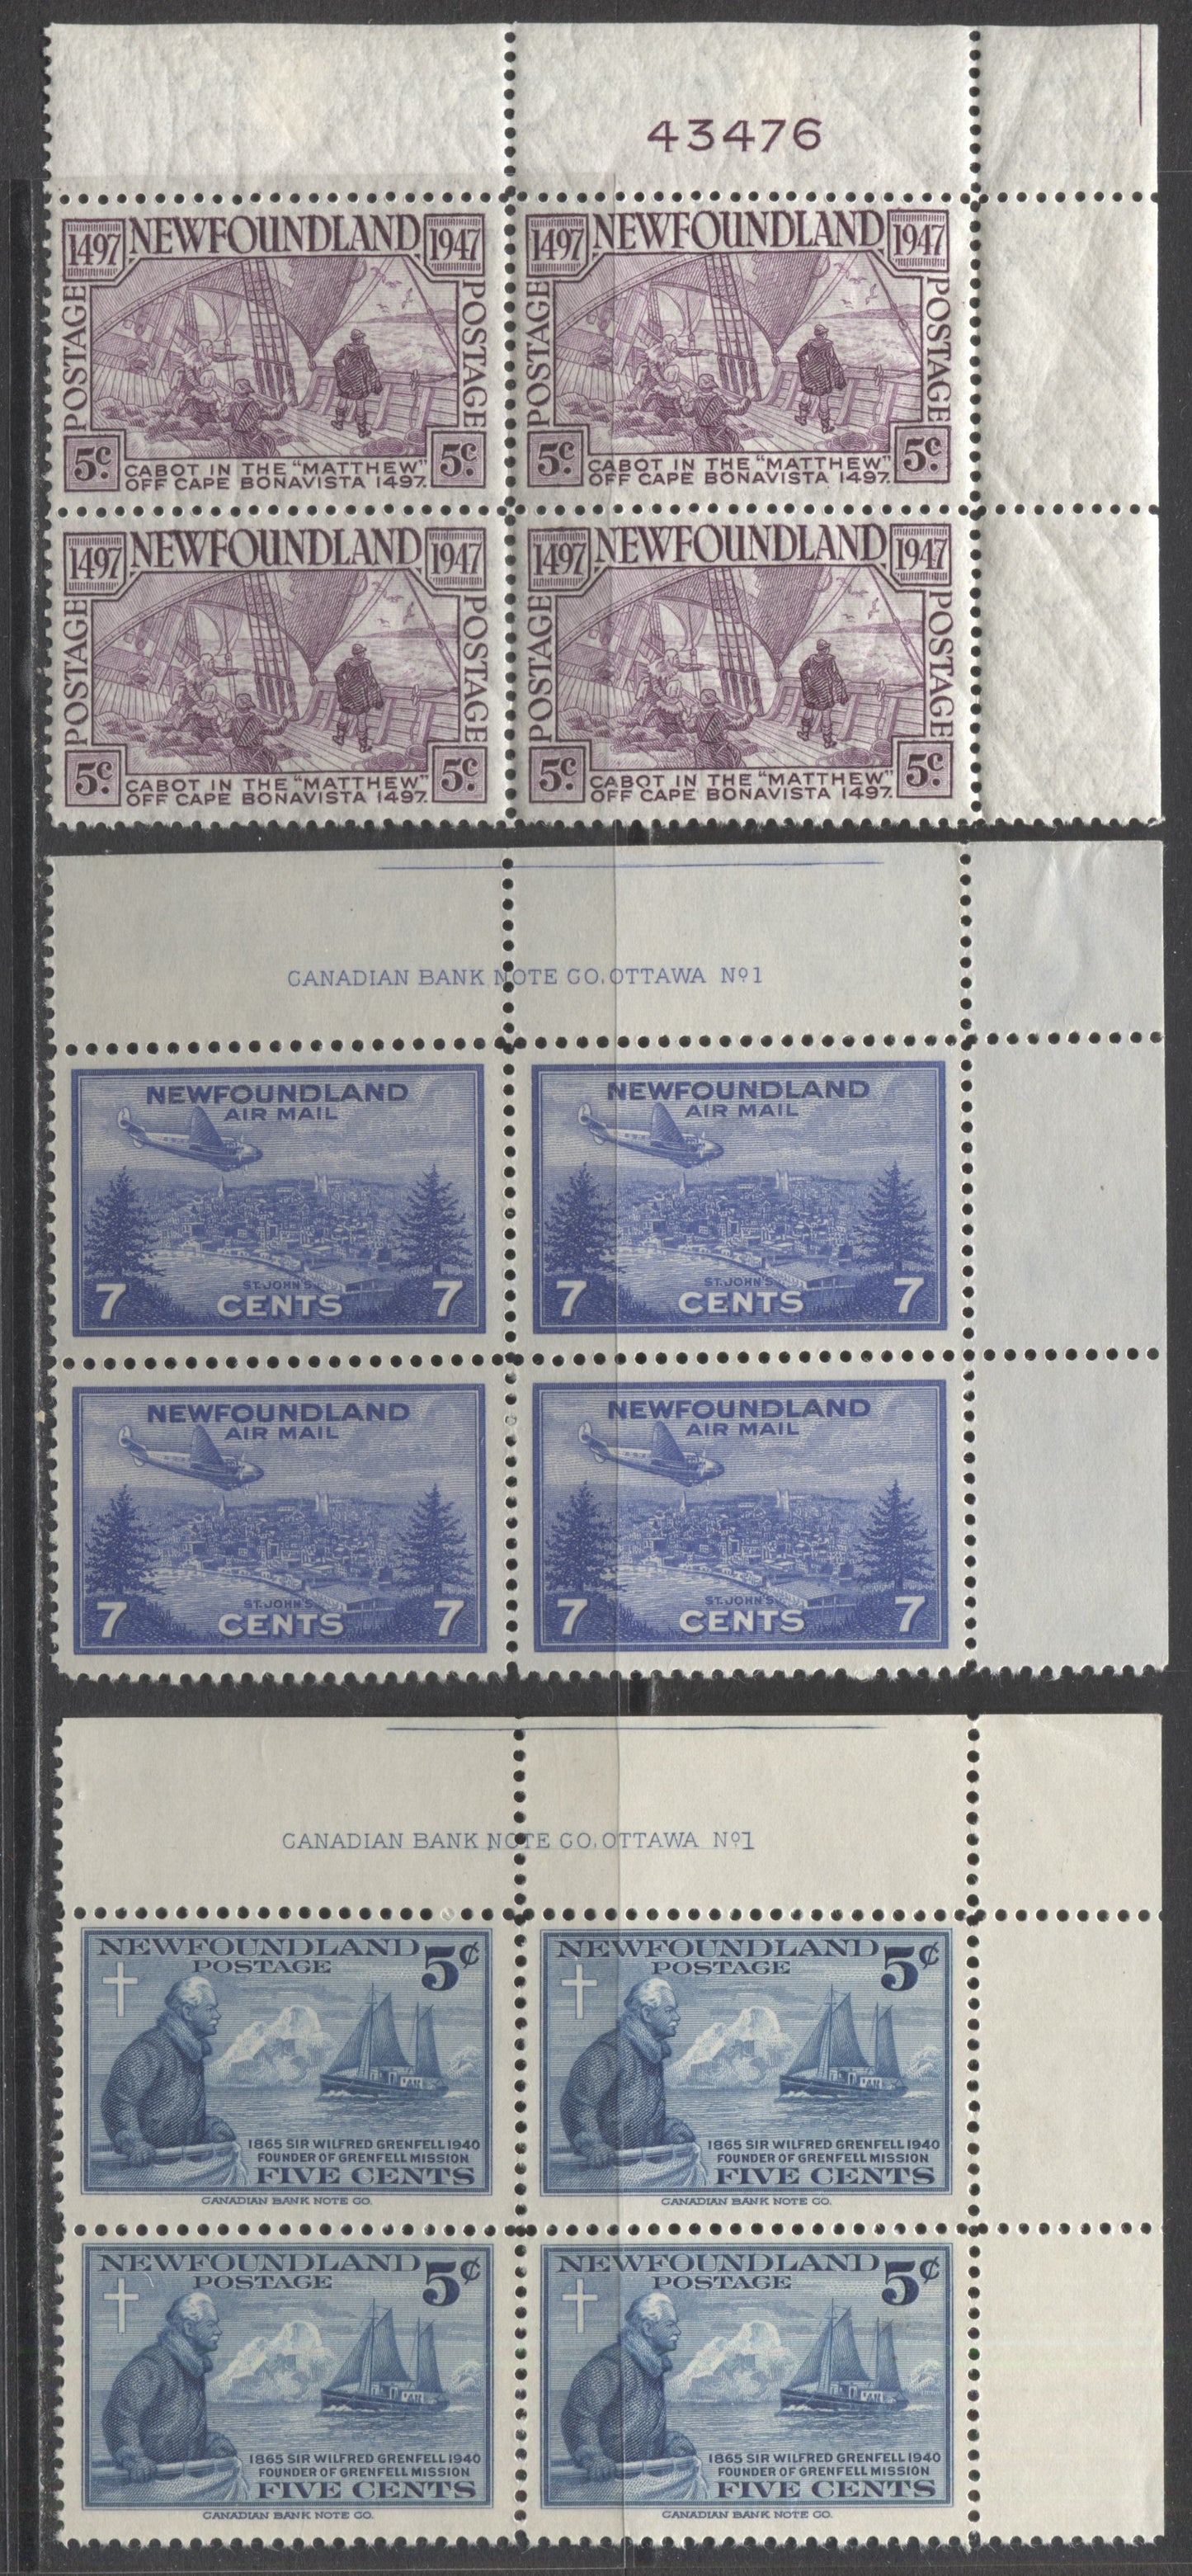 Lot 202 Newfoundland #252, 270, C19 5c & 7c Dull Blue, Rose Violet & Bright Ultramarine Grenfell, Cabot On The Matthew & View Of St. Johns, 1941-1947 Commemorative & Airmail Issues, 3 F/VFNH & LH UR Plate 1 Blocks Of 4